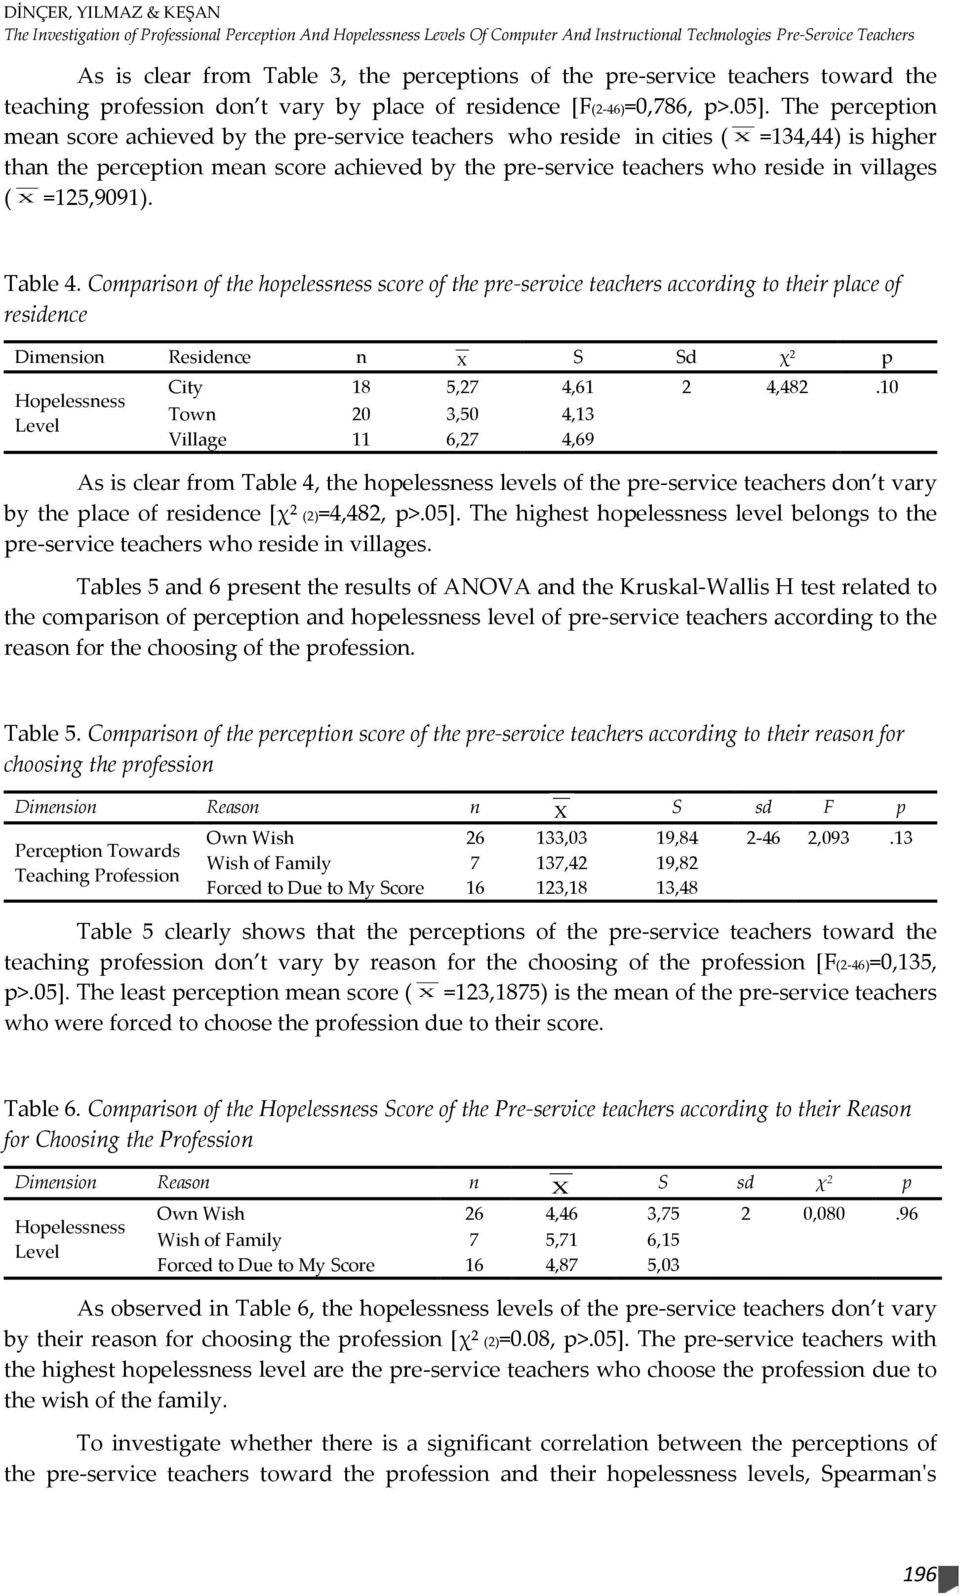 The perception mean score achieved by the pre-service teachers who reside in cities ( X =134,44) is higher than the perception mean score achieved by the pre-service teachers who reside in villages (